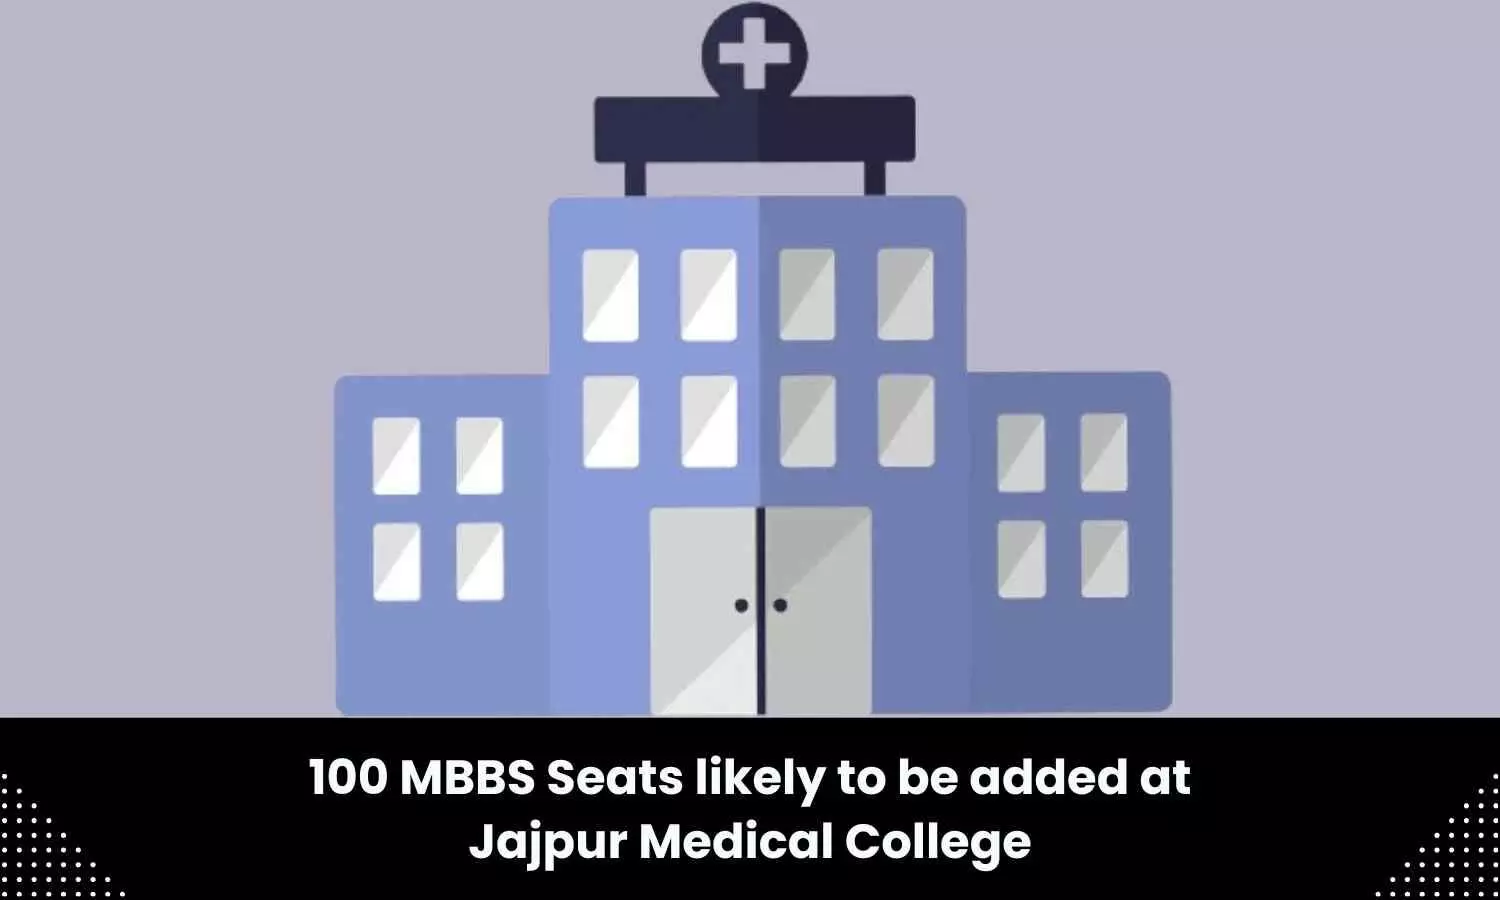 Odisha targets approval of NMC for 100 MBBS seats at Jajpur Medical College